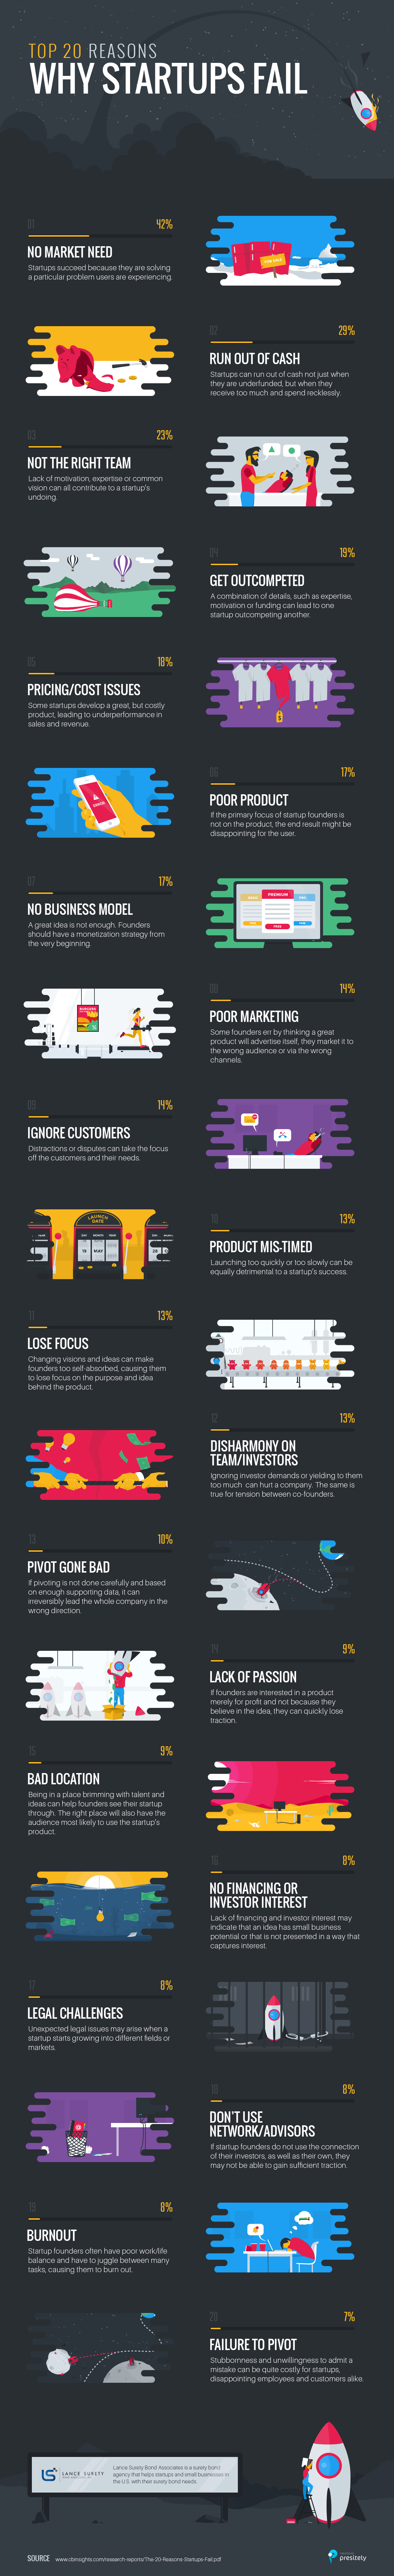 Business Failure infographic